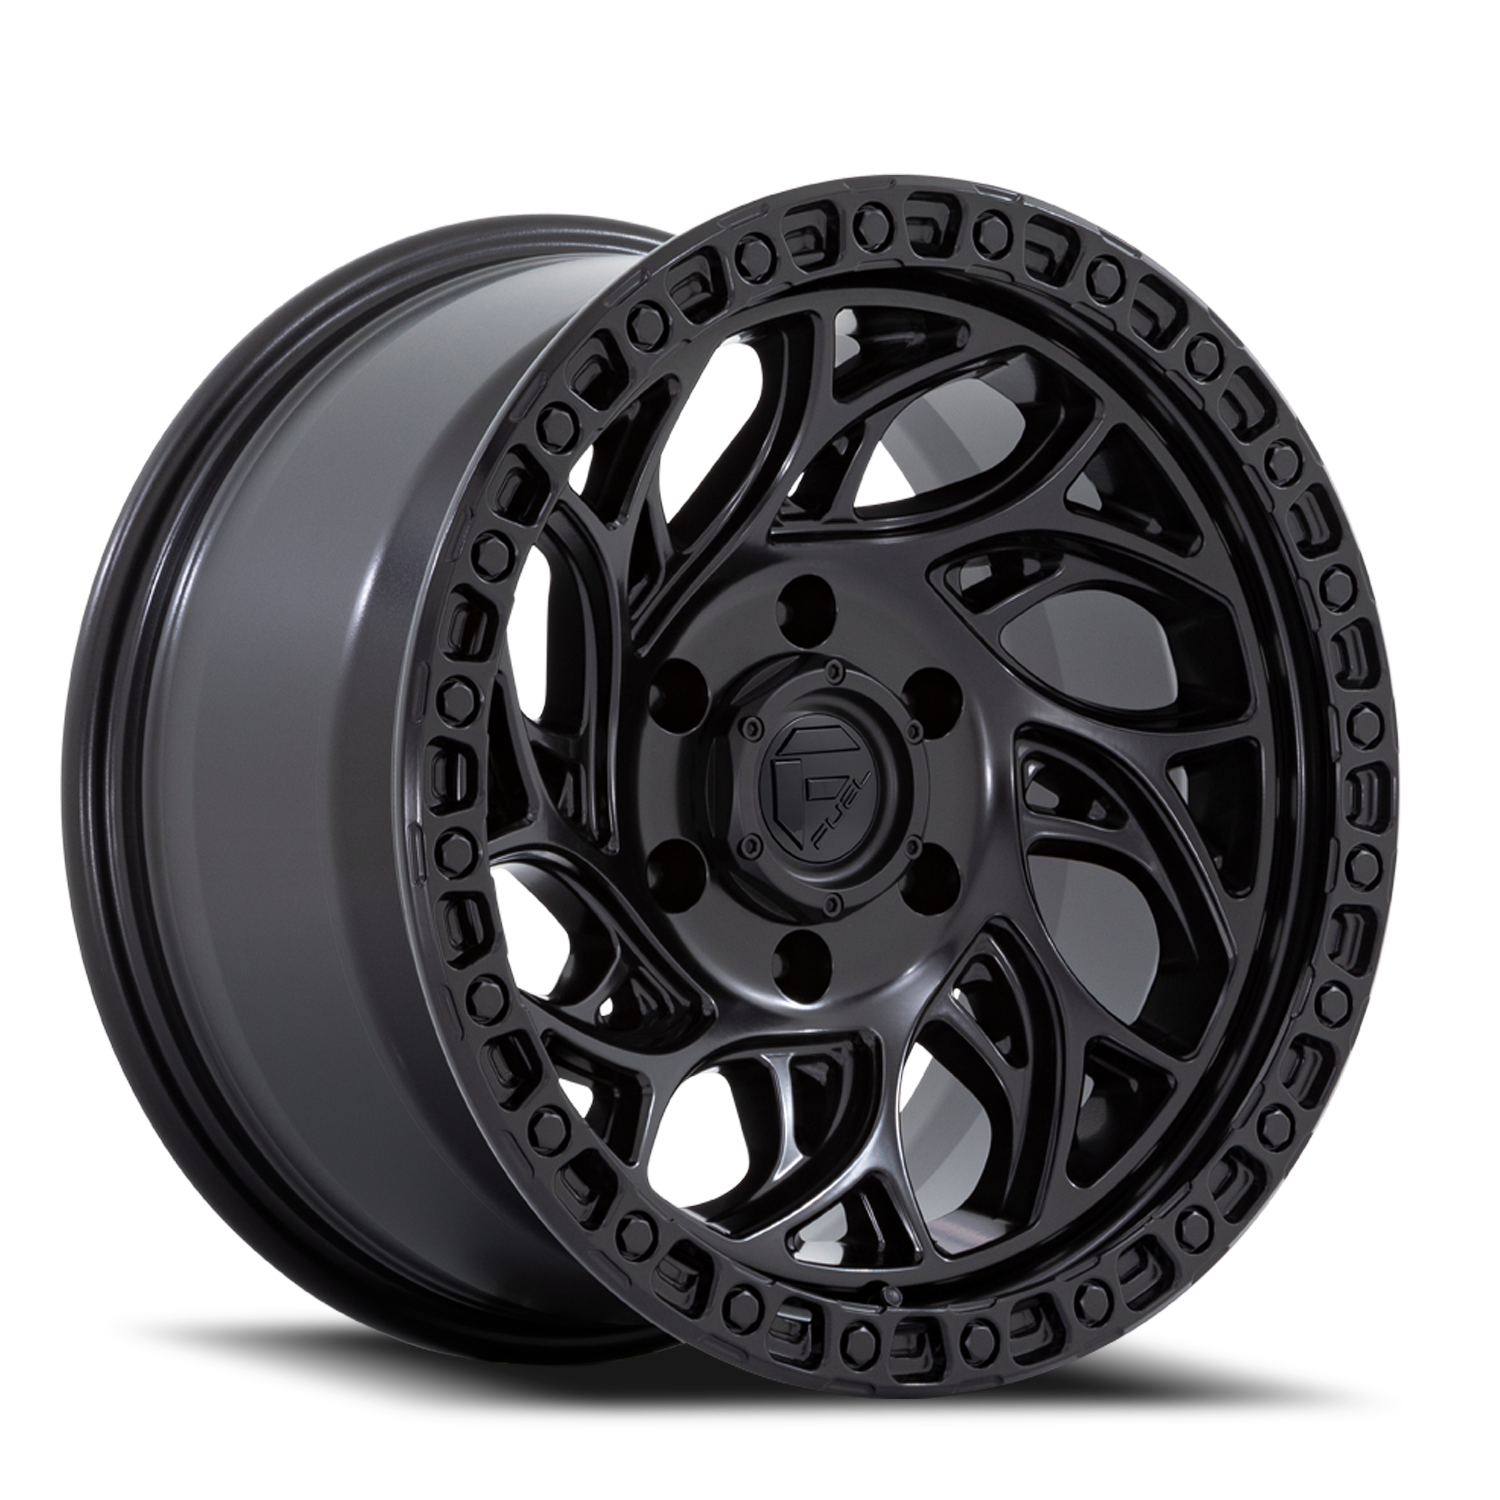 Aluminum Wheels 20X9 Runner OR D852 6 On 139.7 Blackout 106.1 Bore 1 Offset Fuel Off Road Wheels